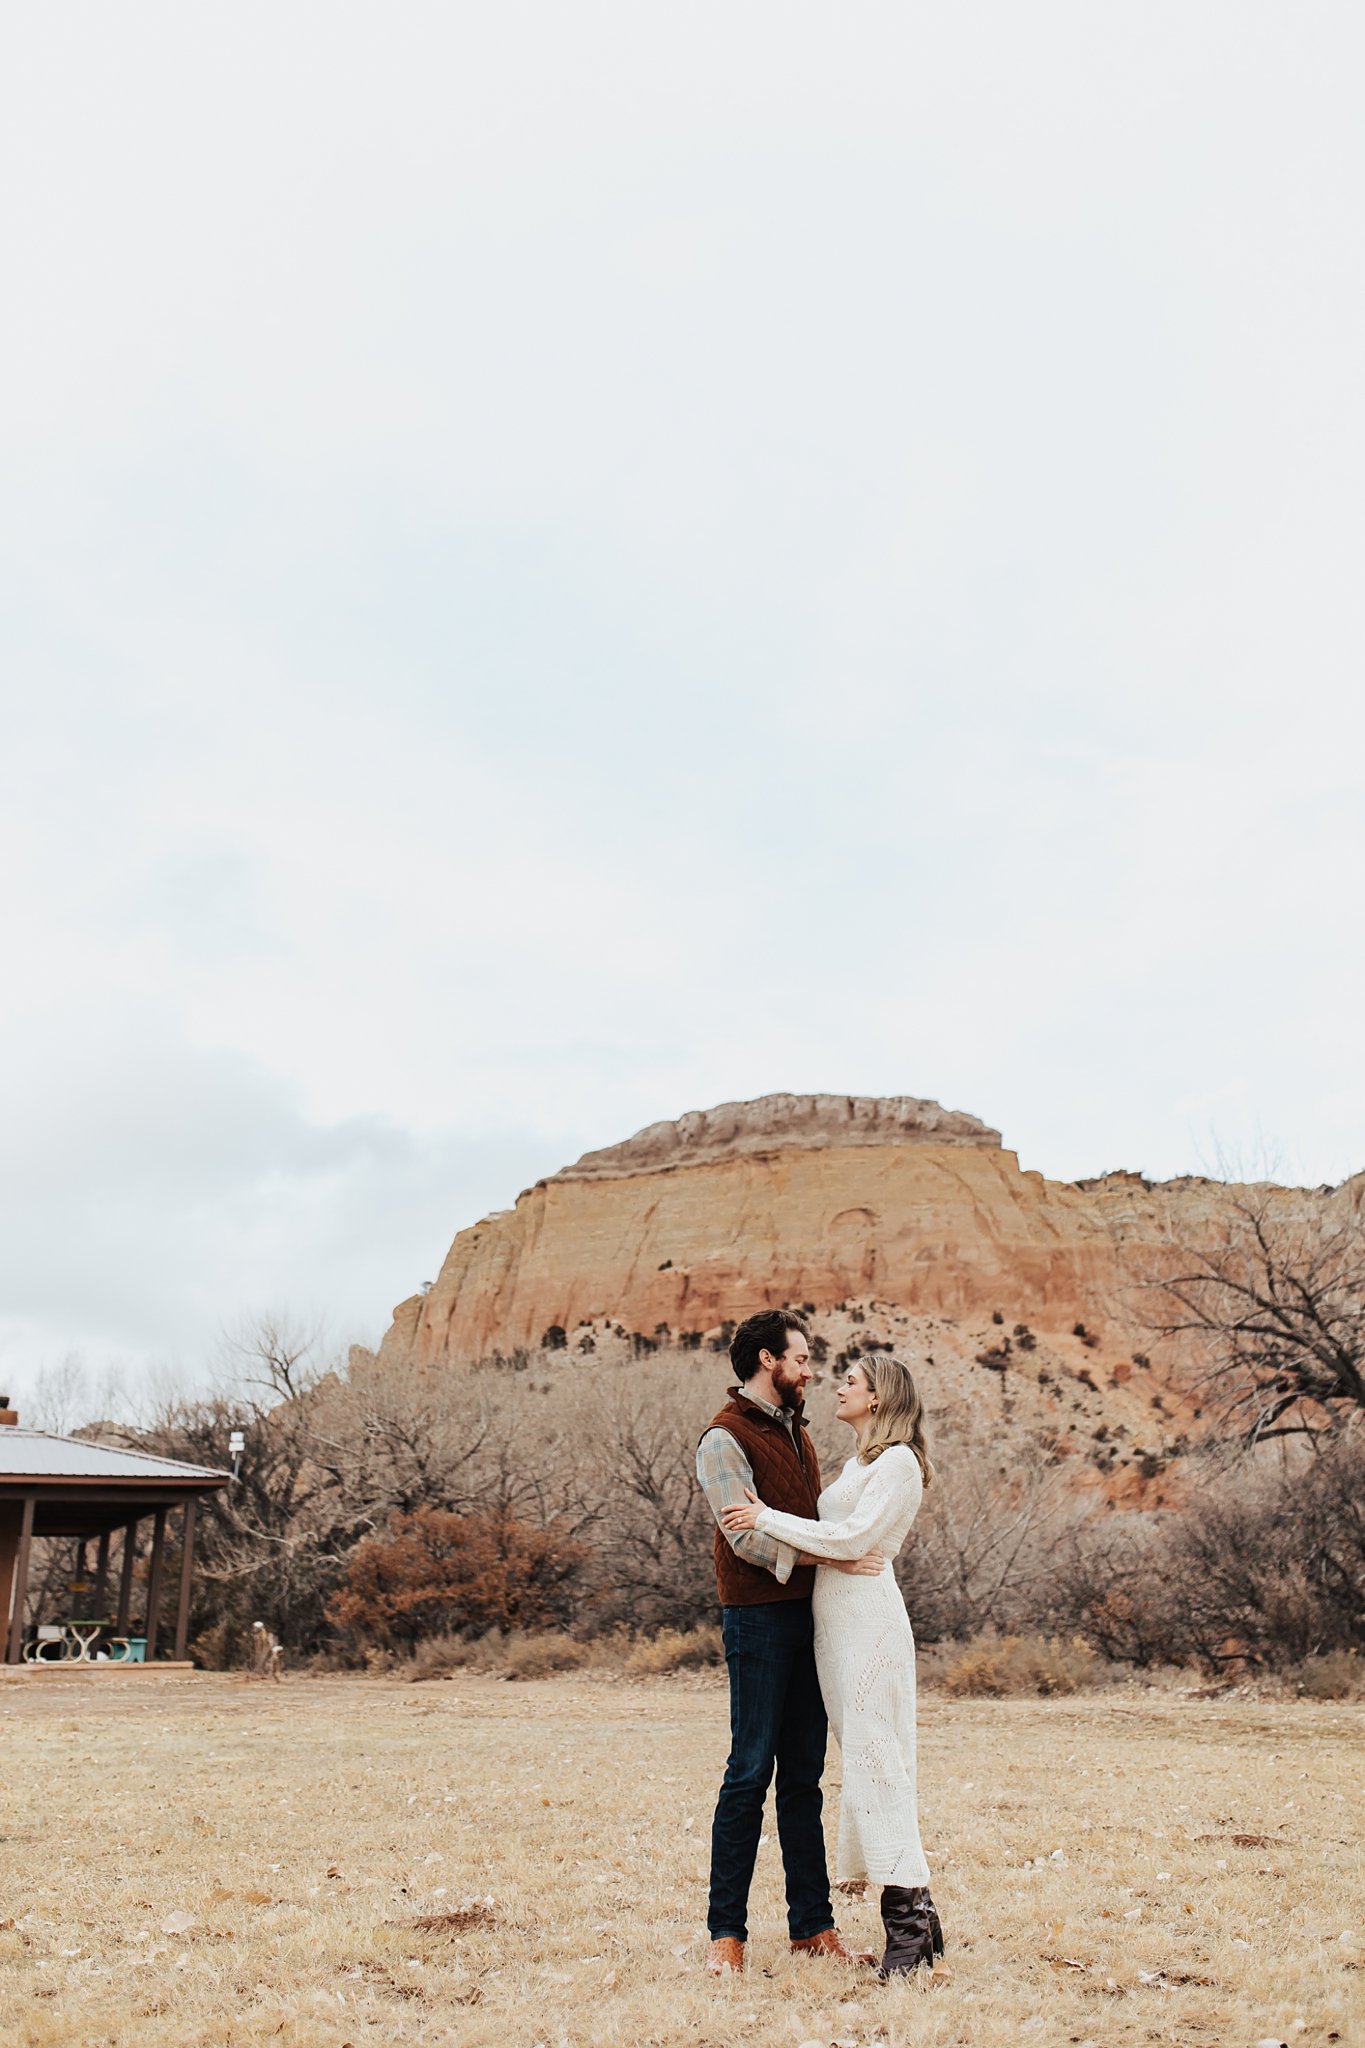 Alicia+lucia+photography+-+albuquerque+wedding+photographer+-+santa+fe+wedding+photography+-+new+mexico+wedding+photographer+-+new+mexico+wedding+-+southwest+engagement+-+ghost+ranch+engagement+-+ghost+ranch+wedding_0005.jpg